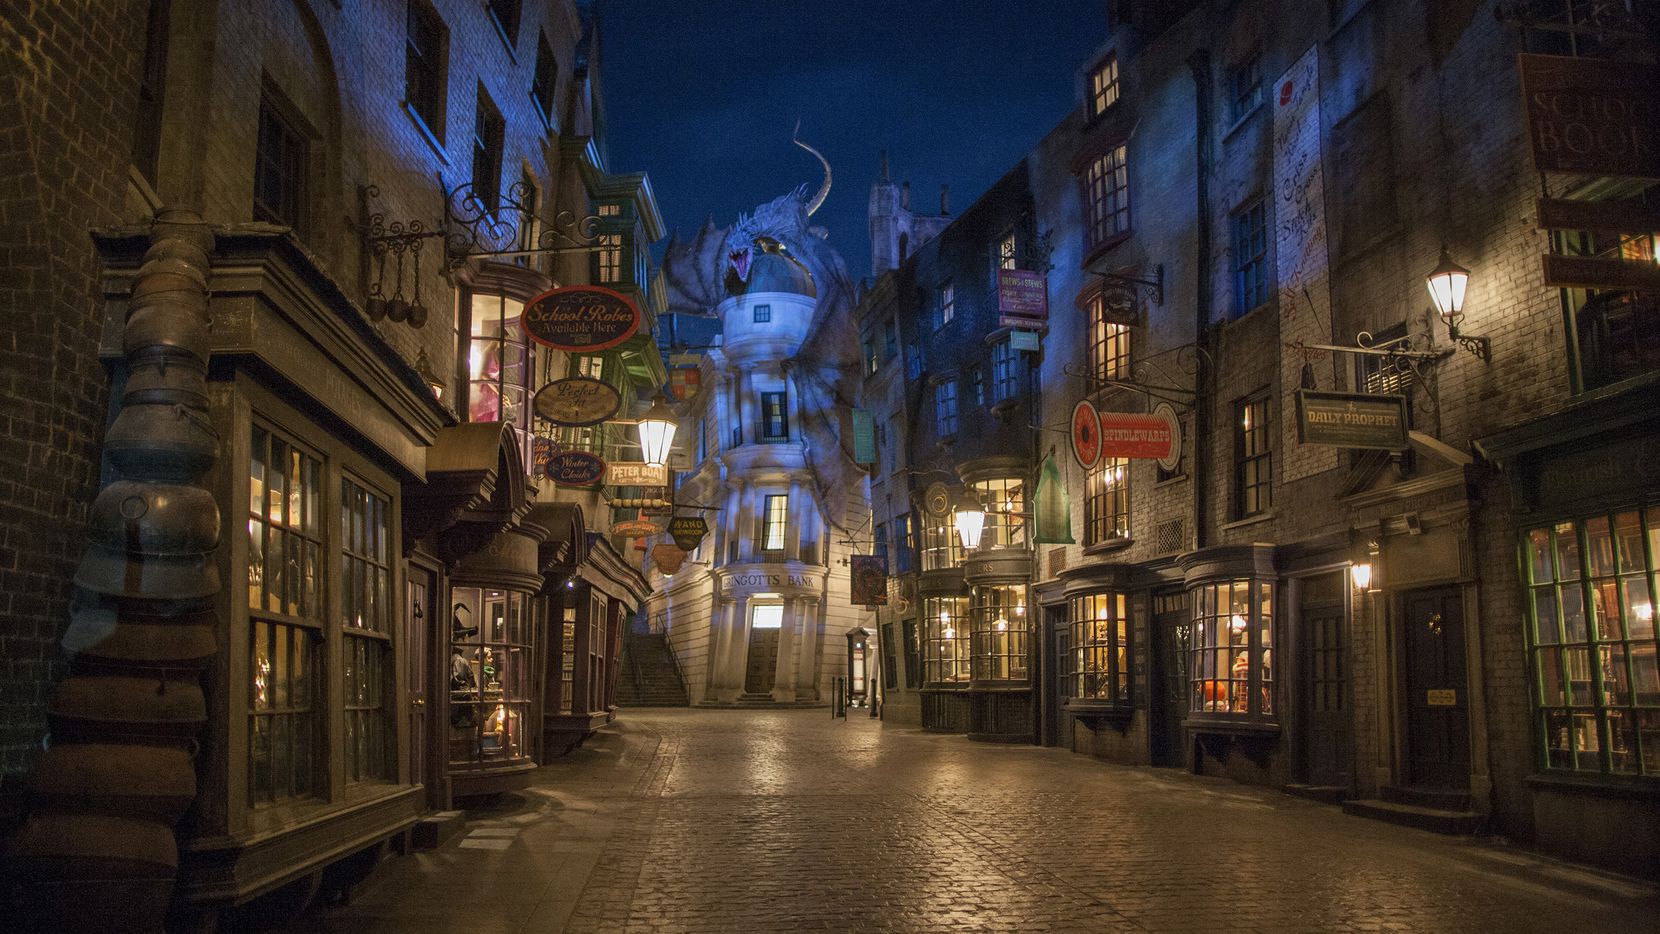 Diagon Alley is one of two "lands" at the Wizarding World of Harry Potter at Universal...